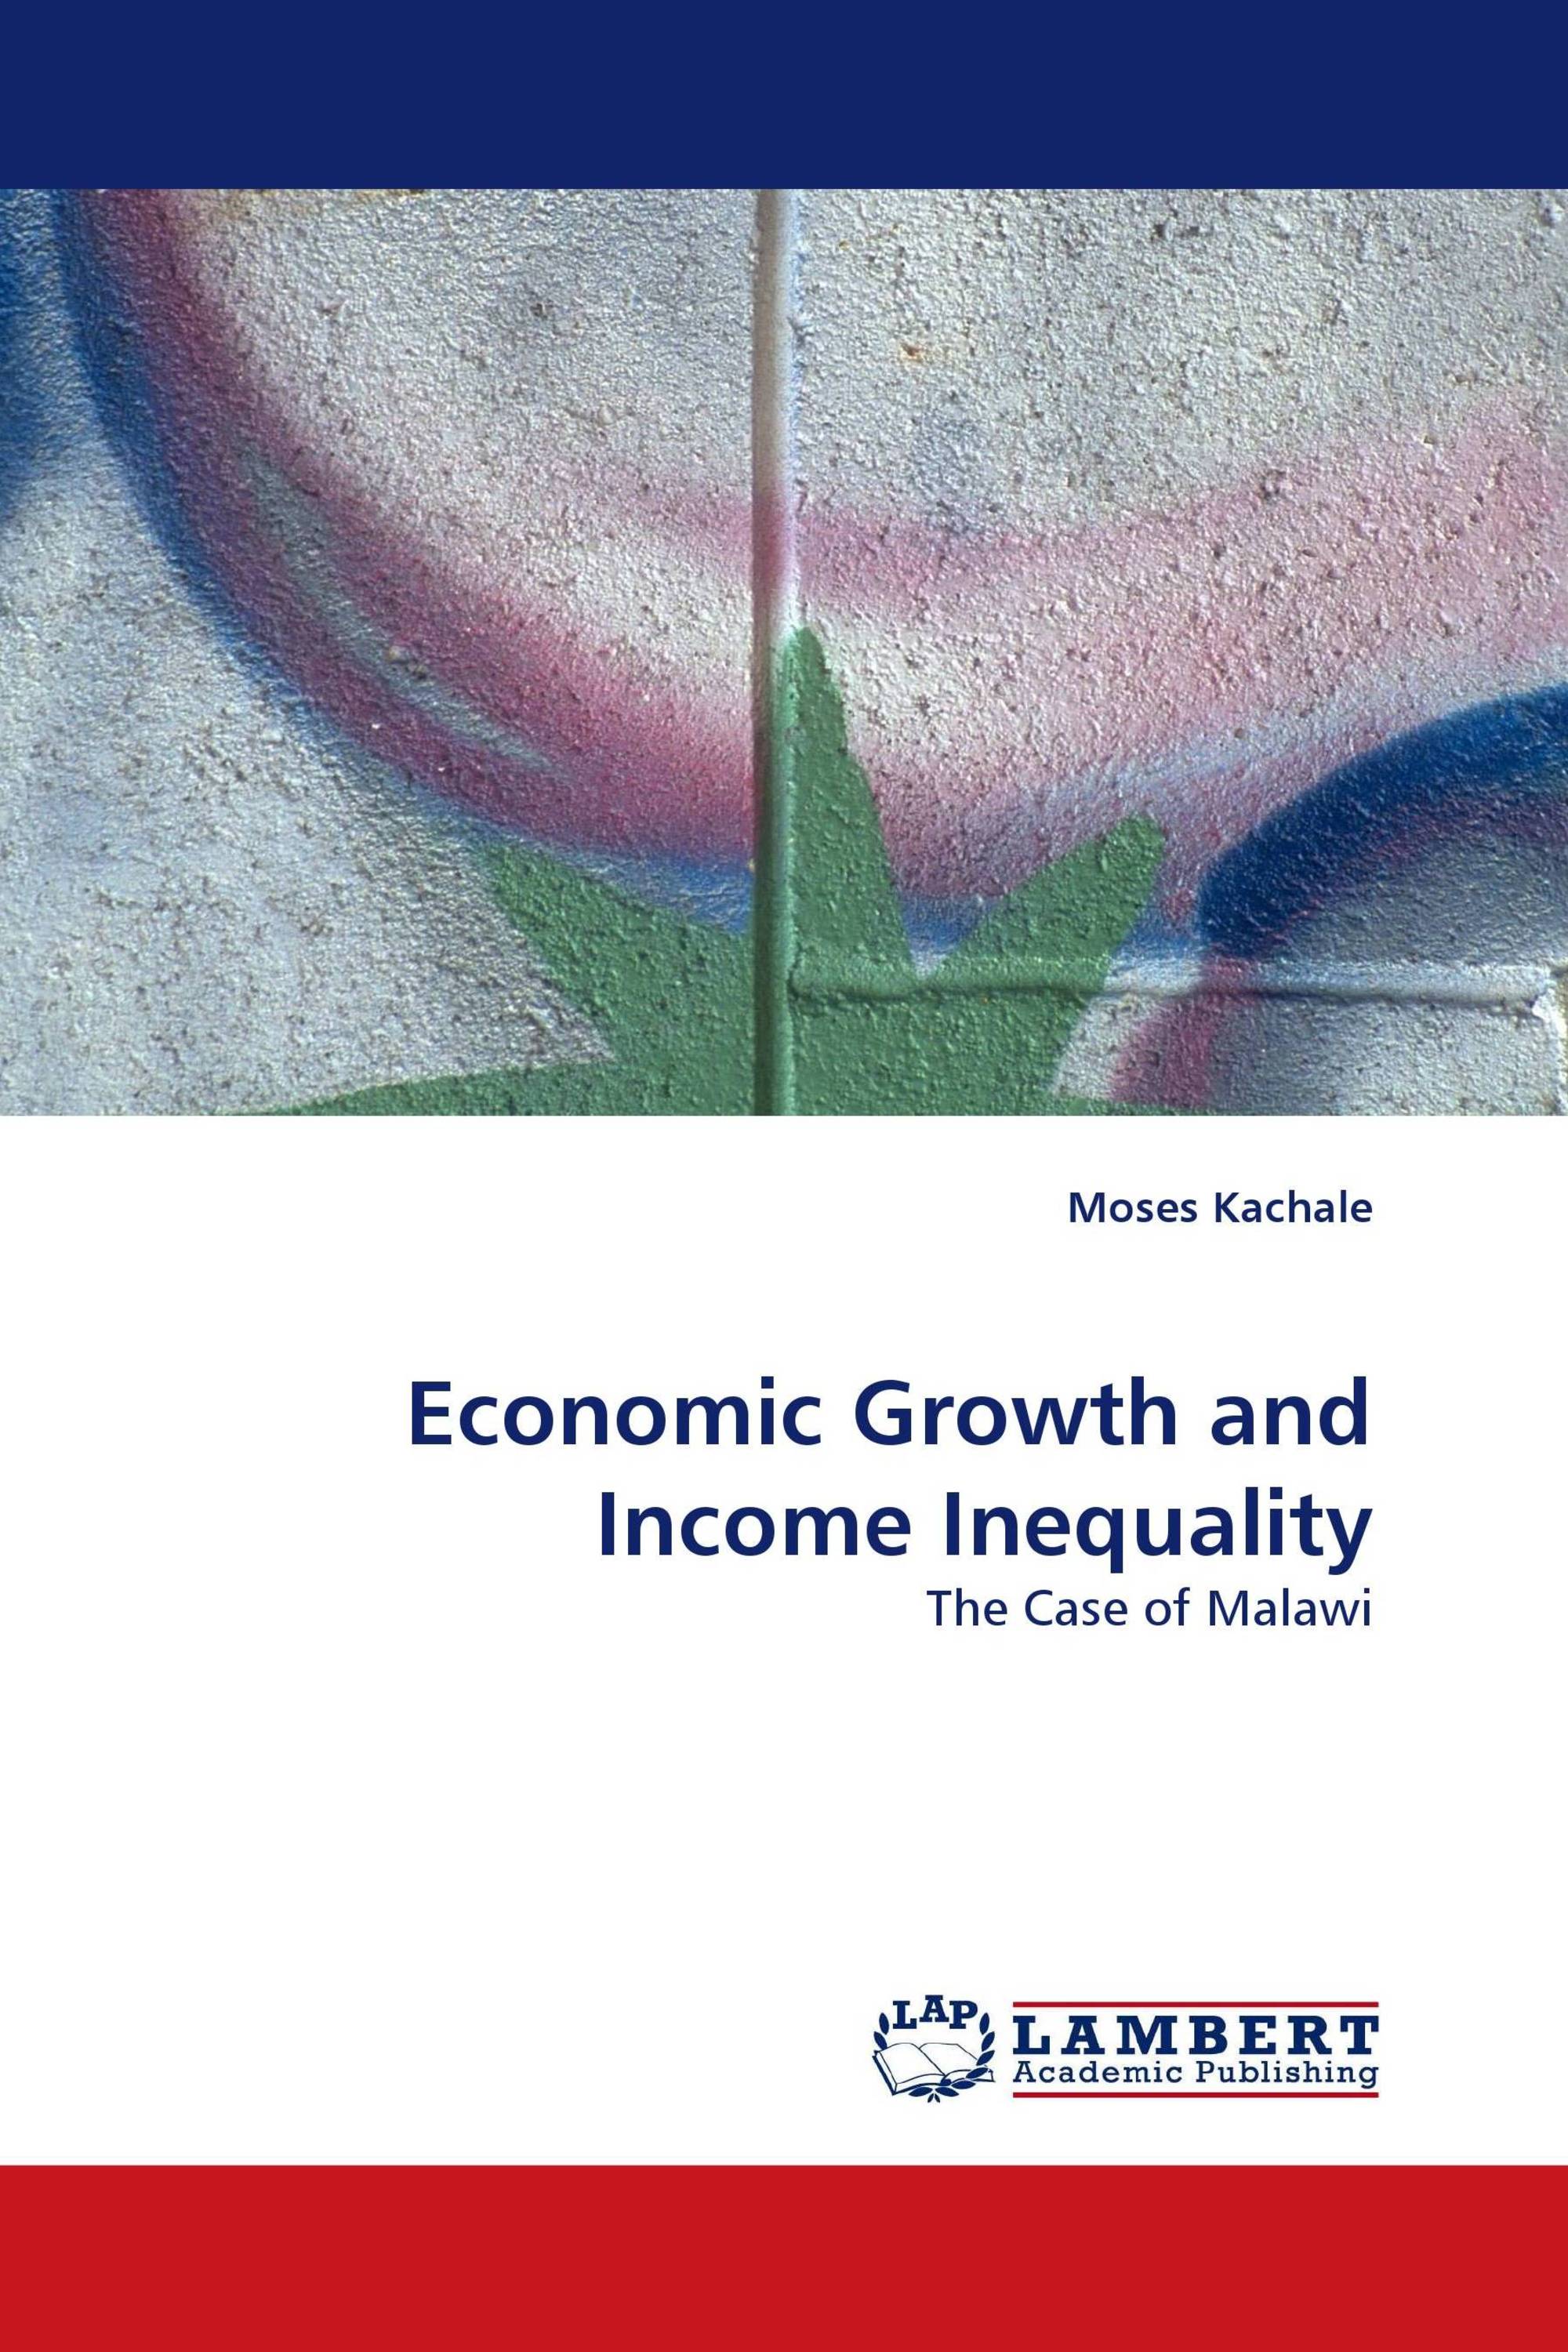 income inequality and economic growth thesis